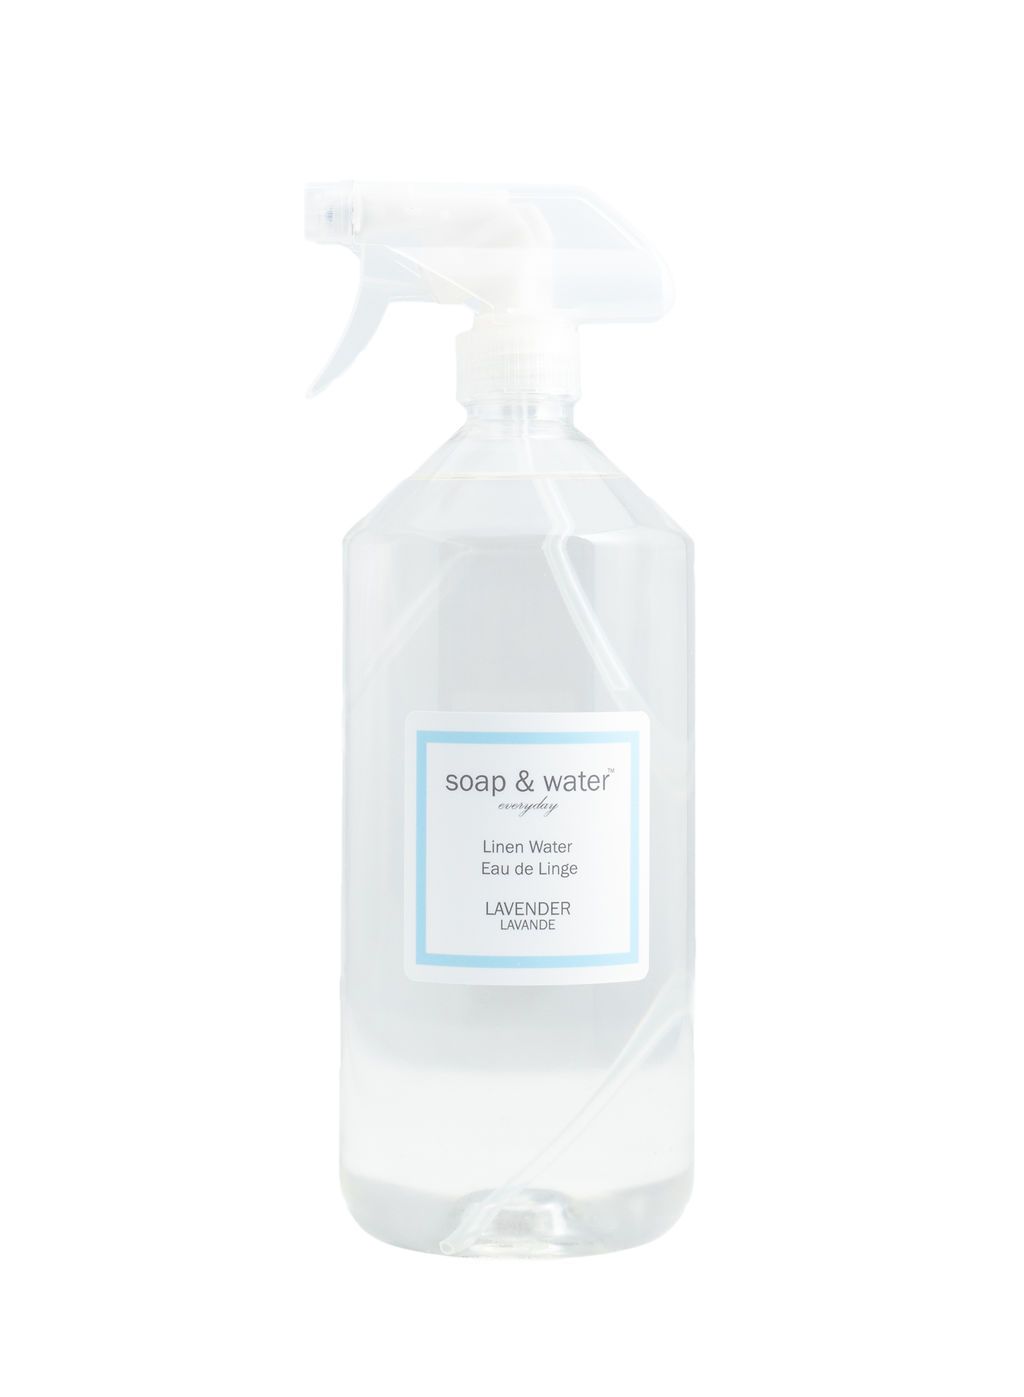 Soap & Water Lavender Linen Water - 1L - Soap & Water Everyday